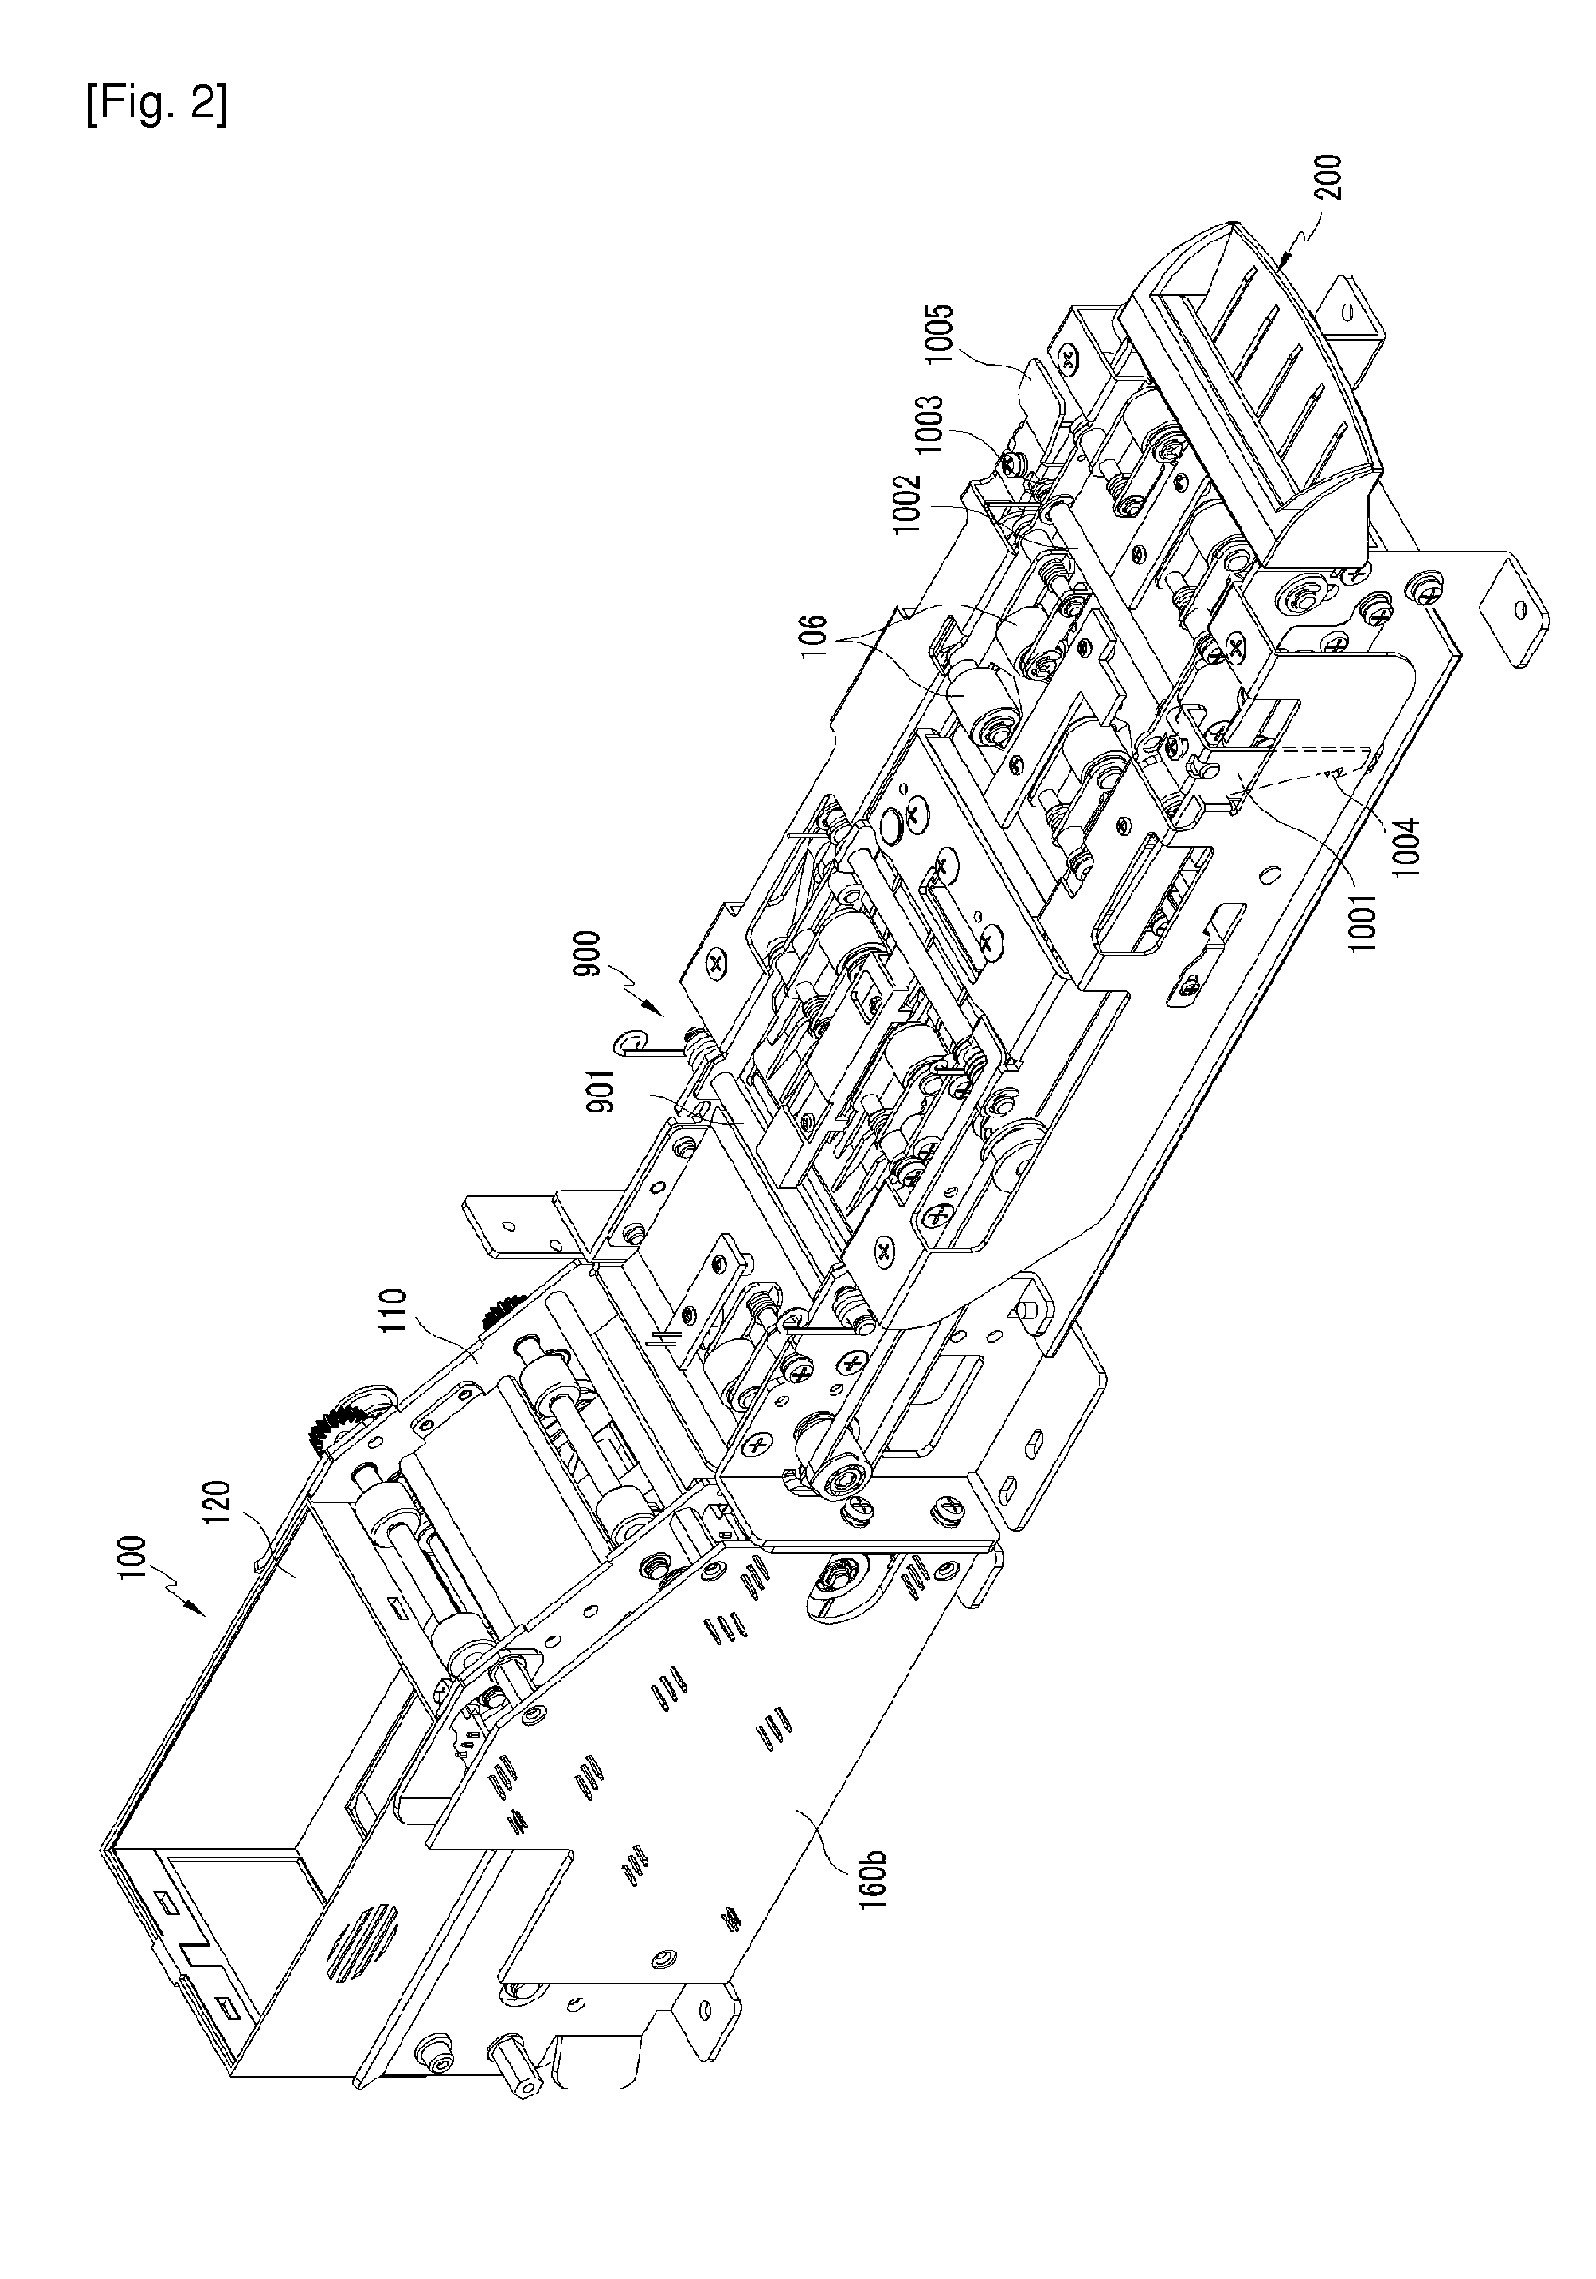 Gaming card processing device enabling the first-in-first-out management of rewritable cards